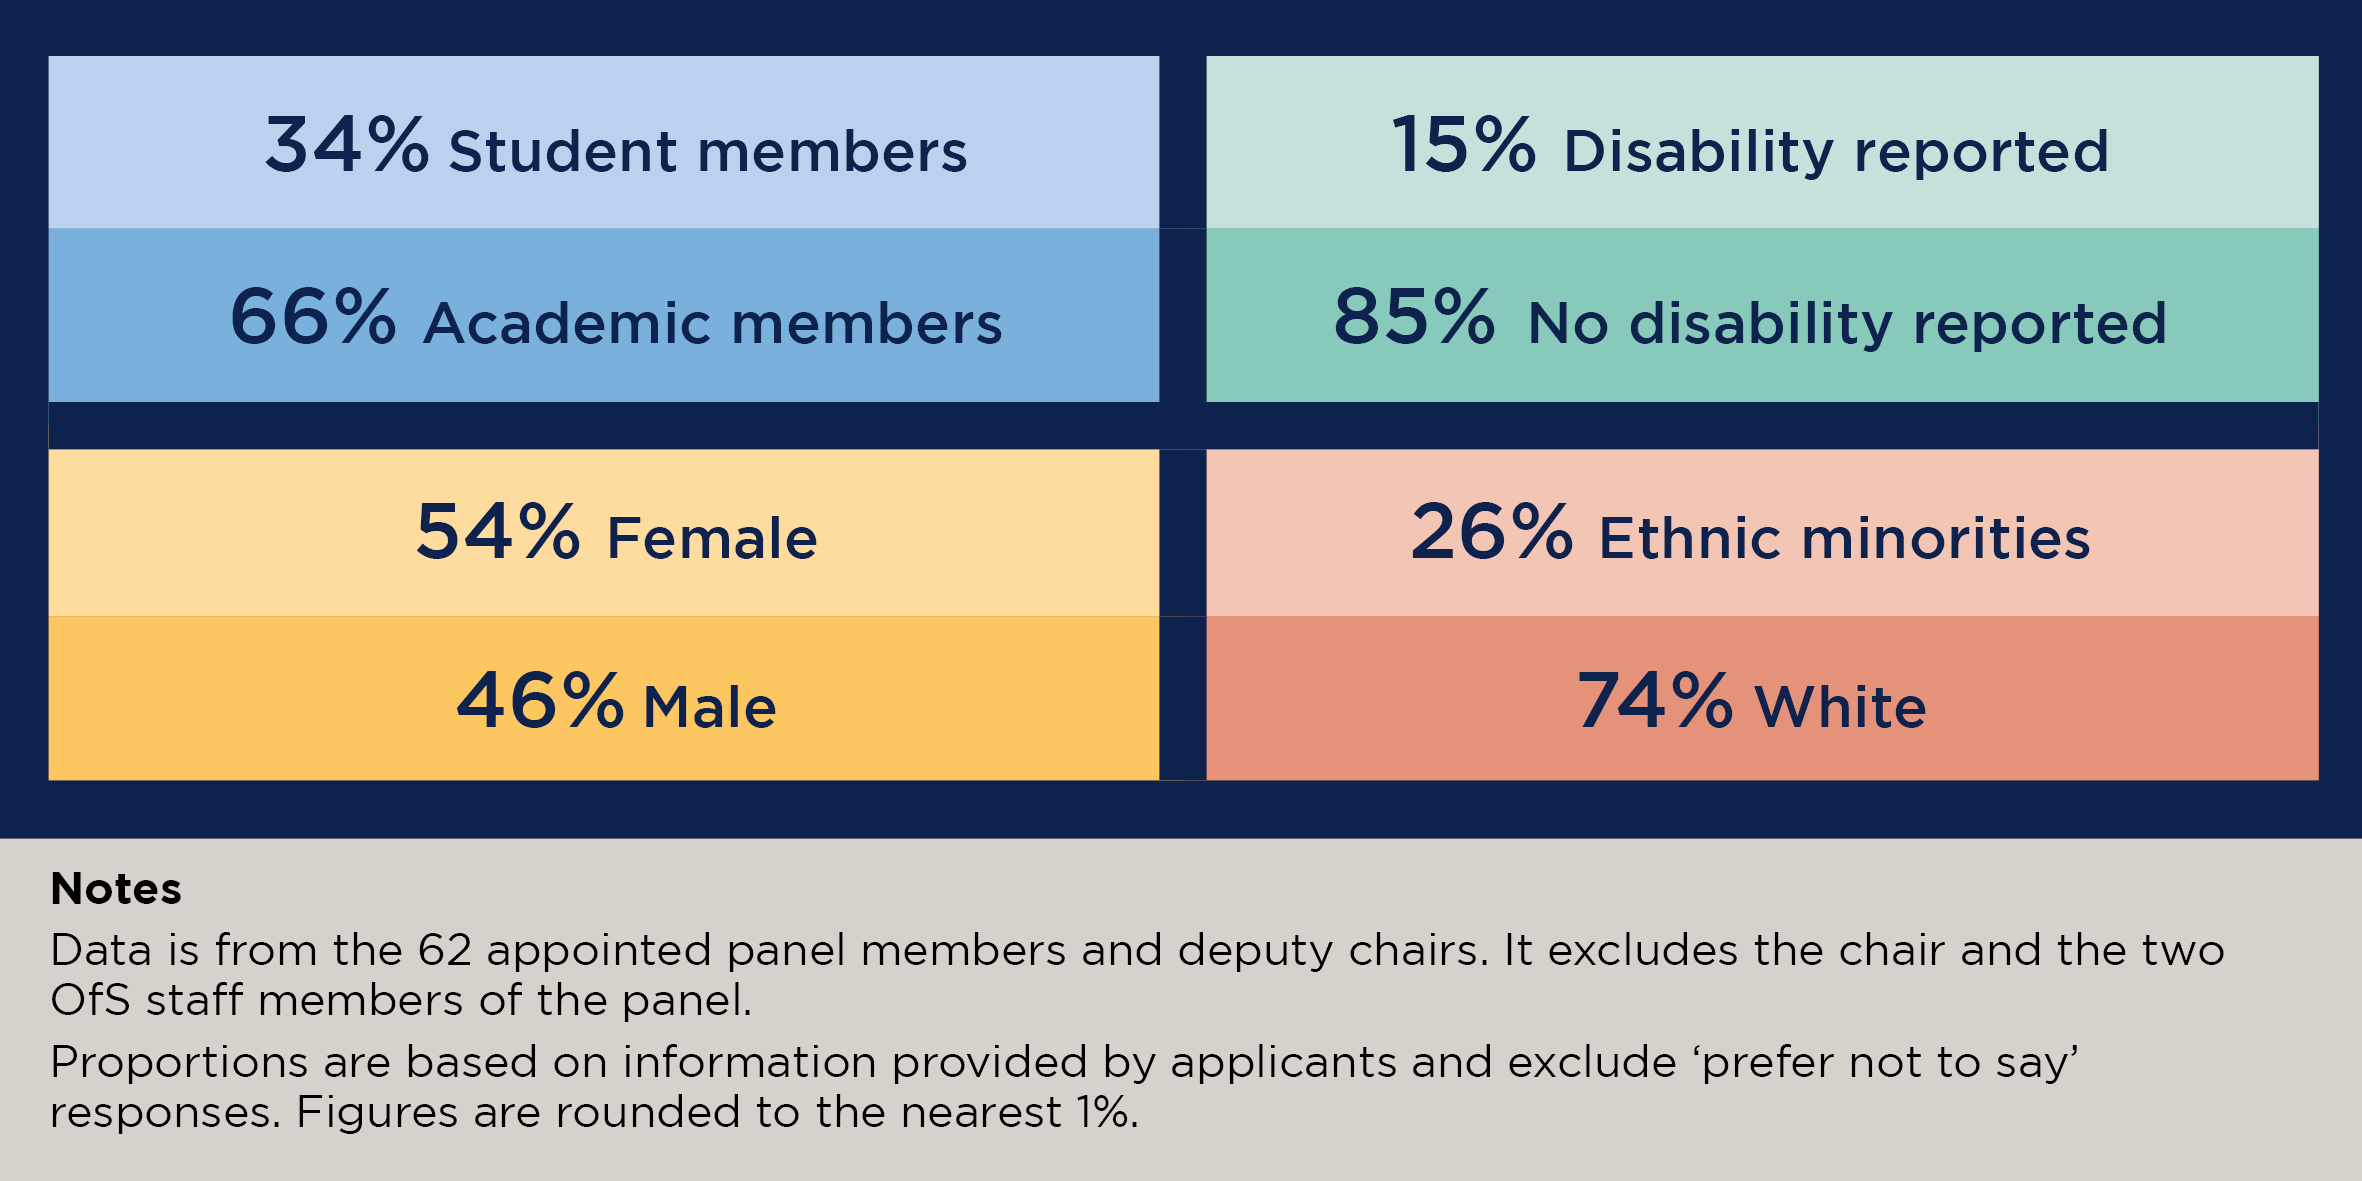 TEF panel member characteristics: 34% student members, 66% academic members, 15% disability reported, 85% no disability reported, 54% female, 46% male, 26% ethnic minorities, 74% white.